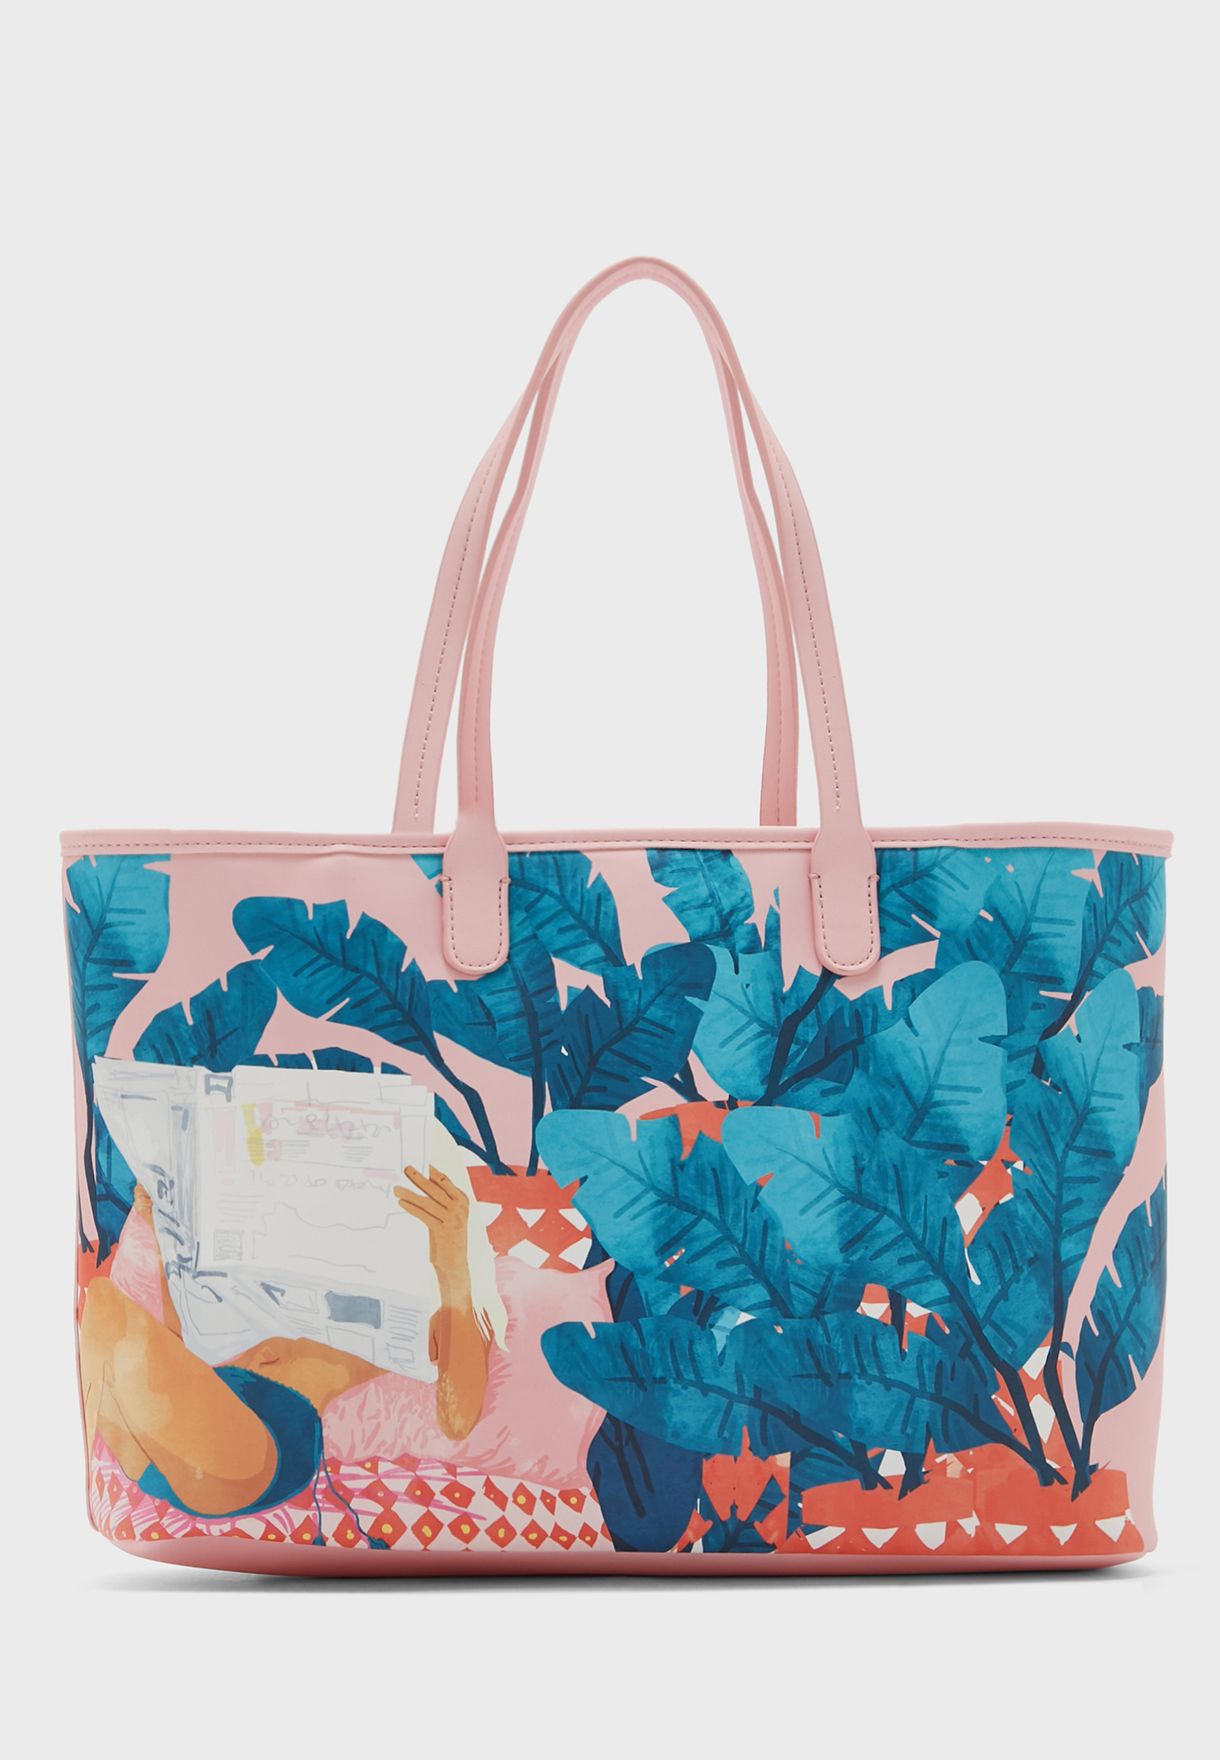 Buy Fenella Smith London prints Top Handle Printed Tote for Women in ...